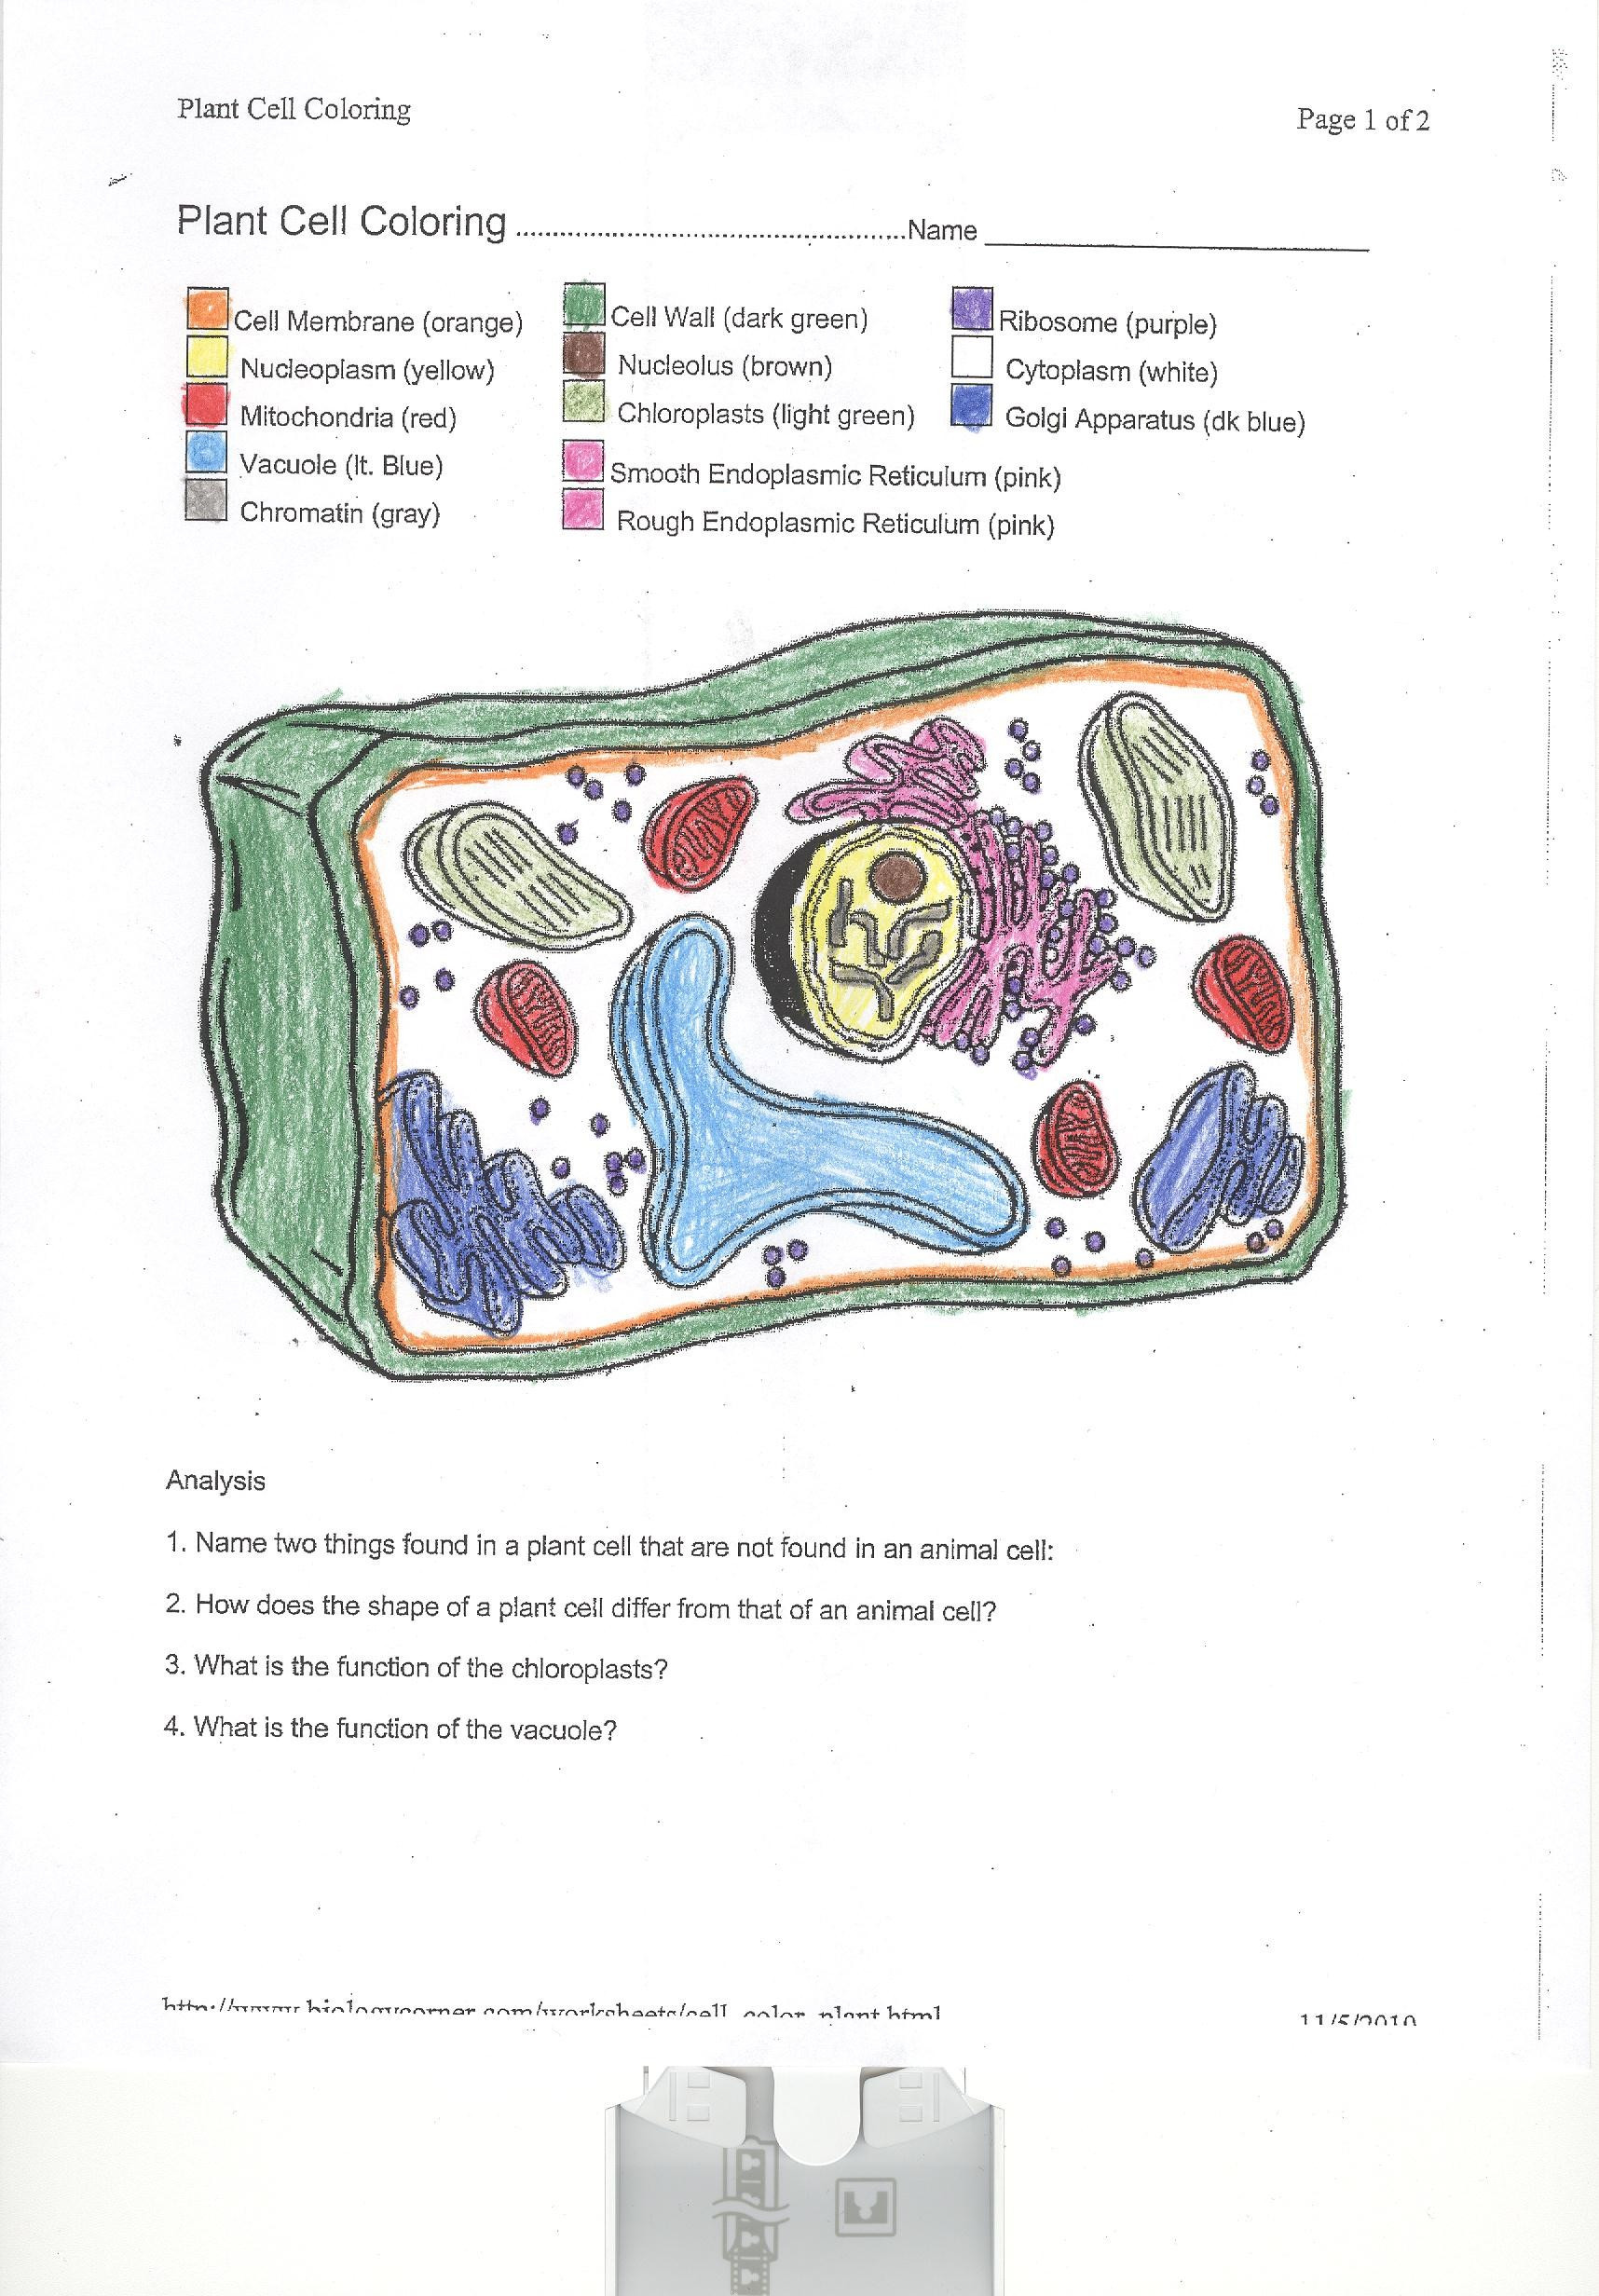 Plant Cell Coloring Worksheet Coloring Animal Cell Coloring Sheet Coloring Pages